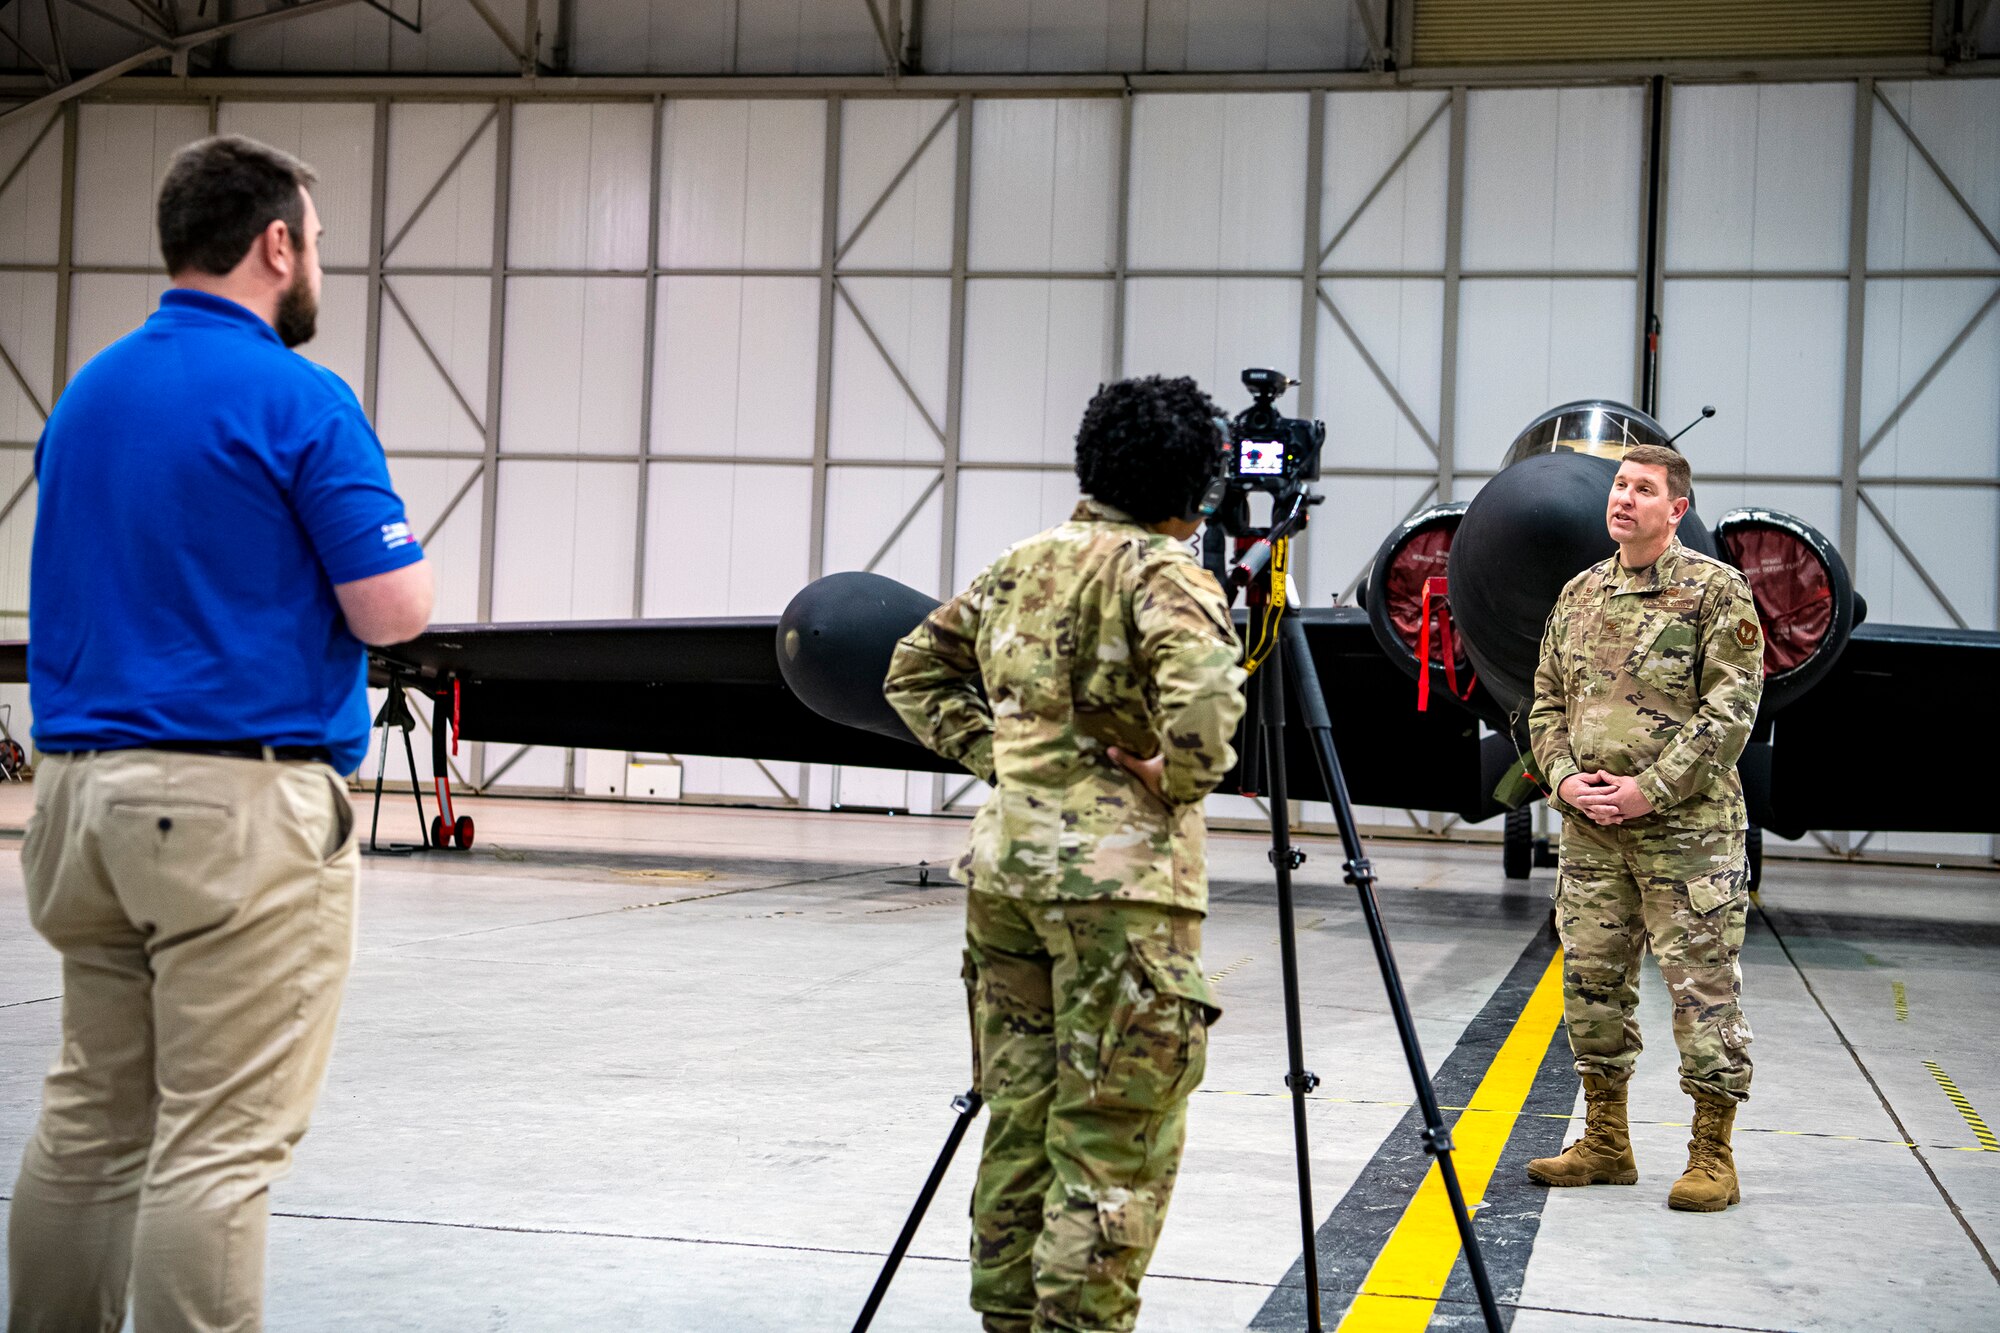 U.S. Air Force Col. Kurt A. Wendt, right, 501st Combat Support Wing commander, performs a video interview in a hangar at RAF Fairford, England, July 7, 2020. Wendt conducted the interview as part of the 2020 Virtual Royal International Air Tattoo. (U.S. Air Force photo by Senior Airman Eugene Oliver)